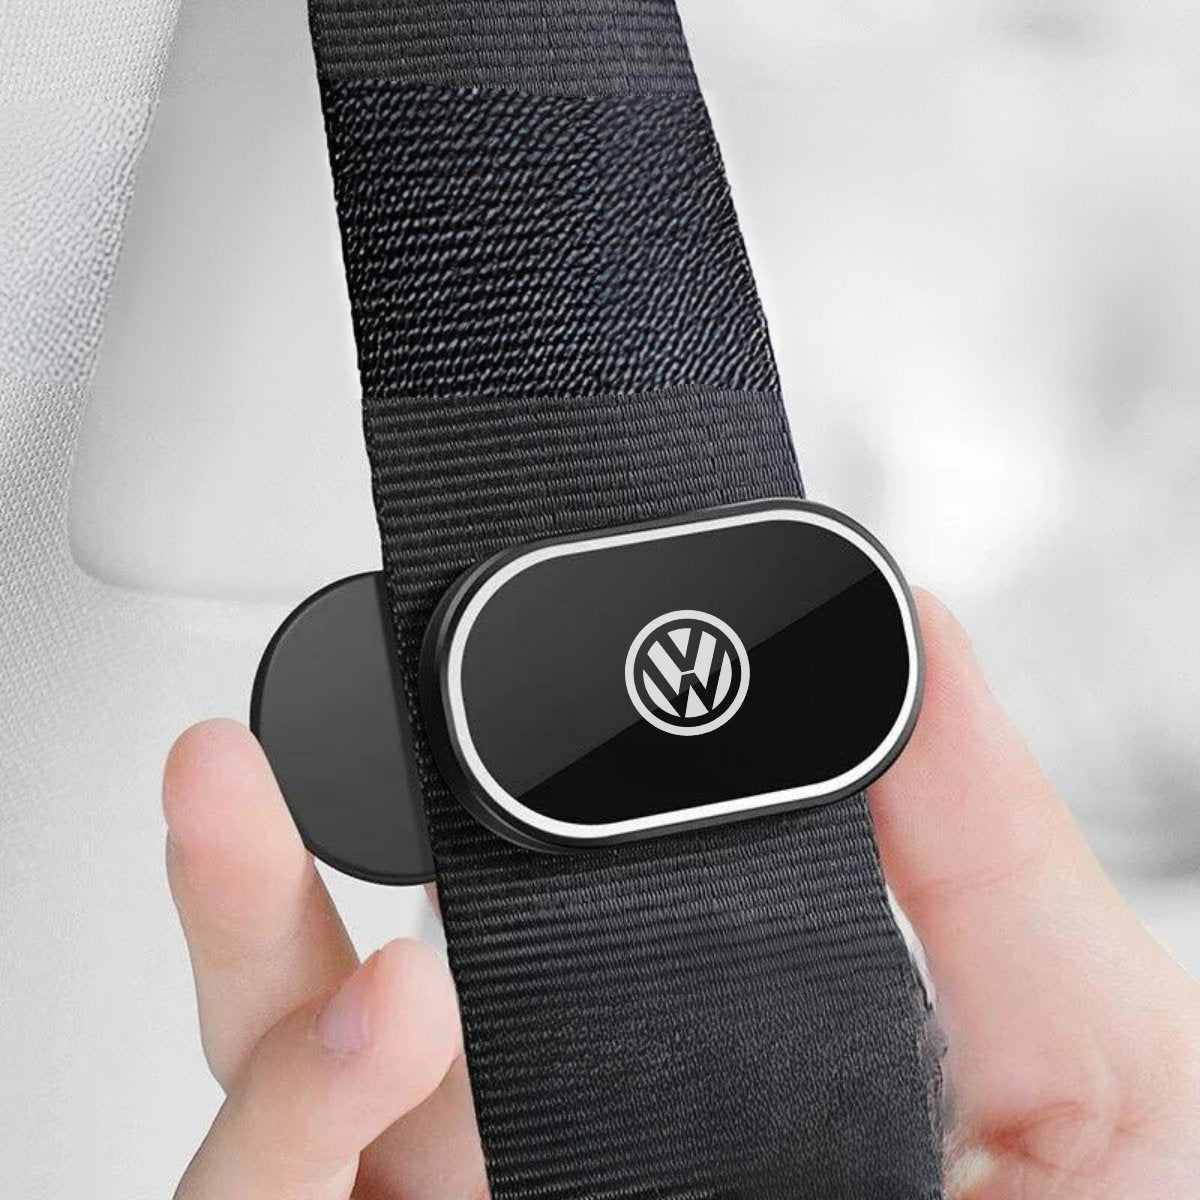 Car Seat Belt Magnetic Suction Fixing Clip - Home Essentials Store Retail